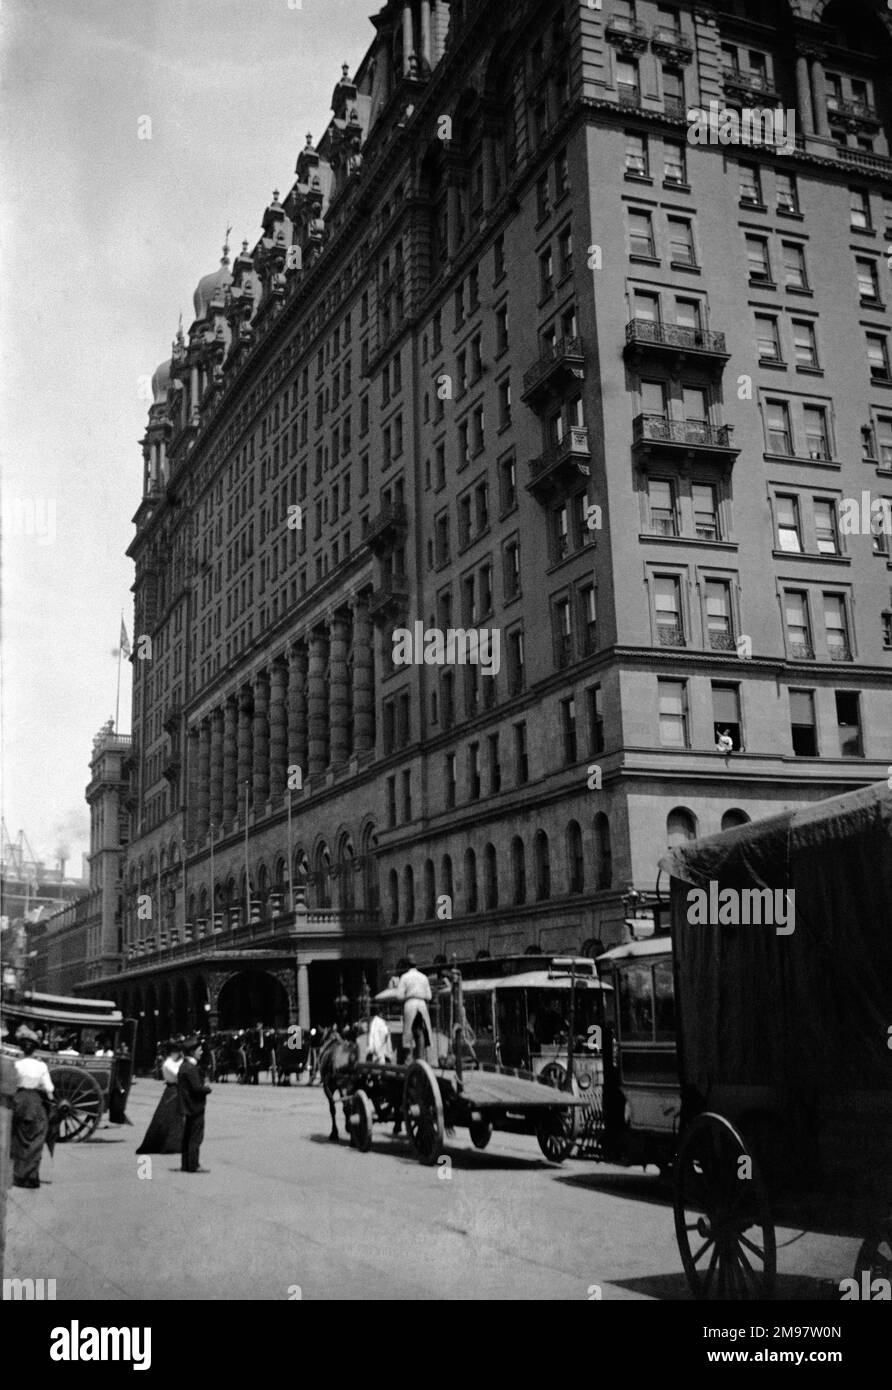 The original Waldorf Astoria was built on 5th avenue, New York - designed by Henry J Hardenbergh and completed in 1893. In 1929 it was demolished to make way for the construction of the Empire State buildings. Stock Photo